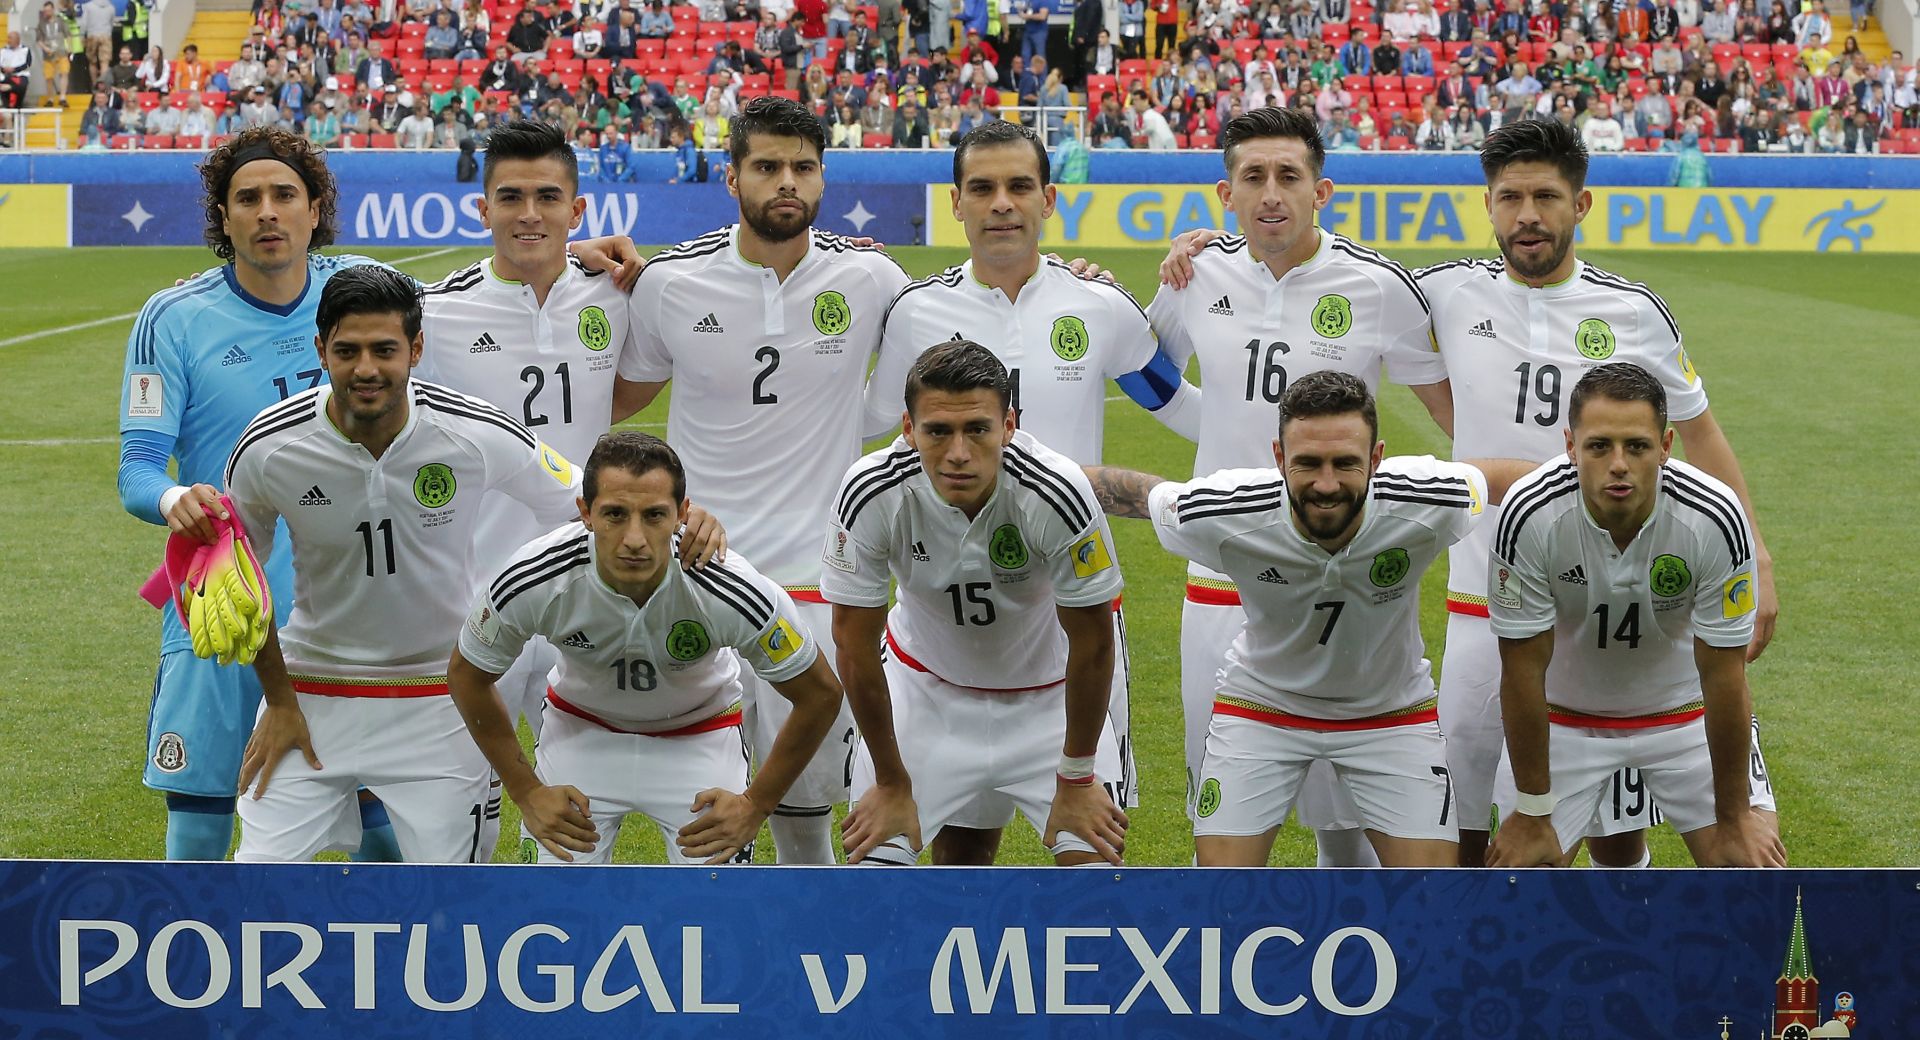 epa06061678 Team of Mexico pose prior the FIFA Confederations Cup third place match Portugal against Mexico at Spartak Stadium, in Moscow, Russia, 2 July 2017.  EPA/SERGEI ILNITSKY